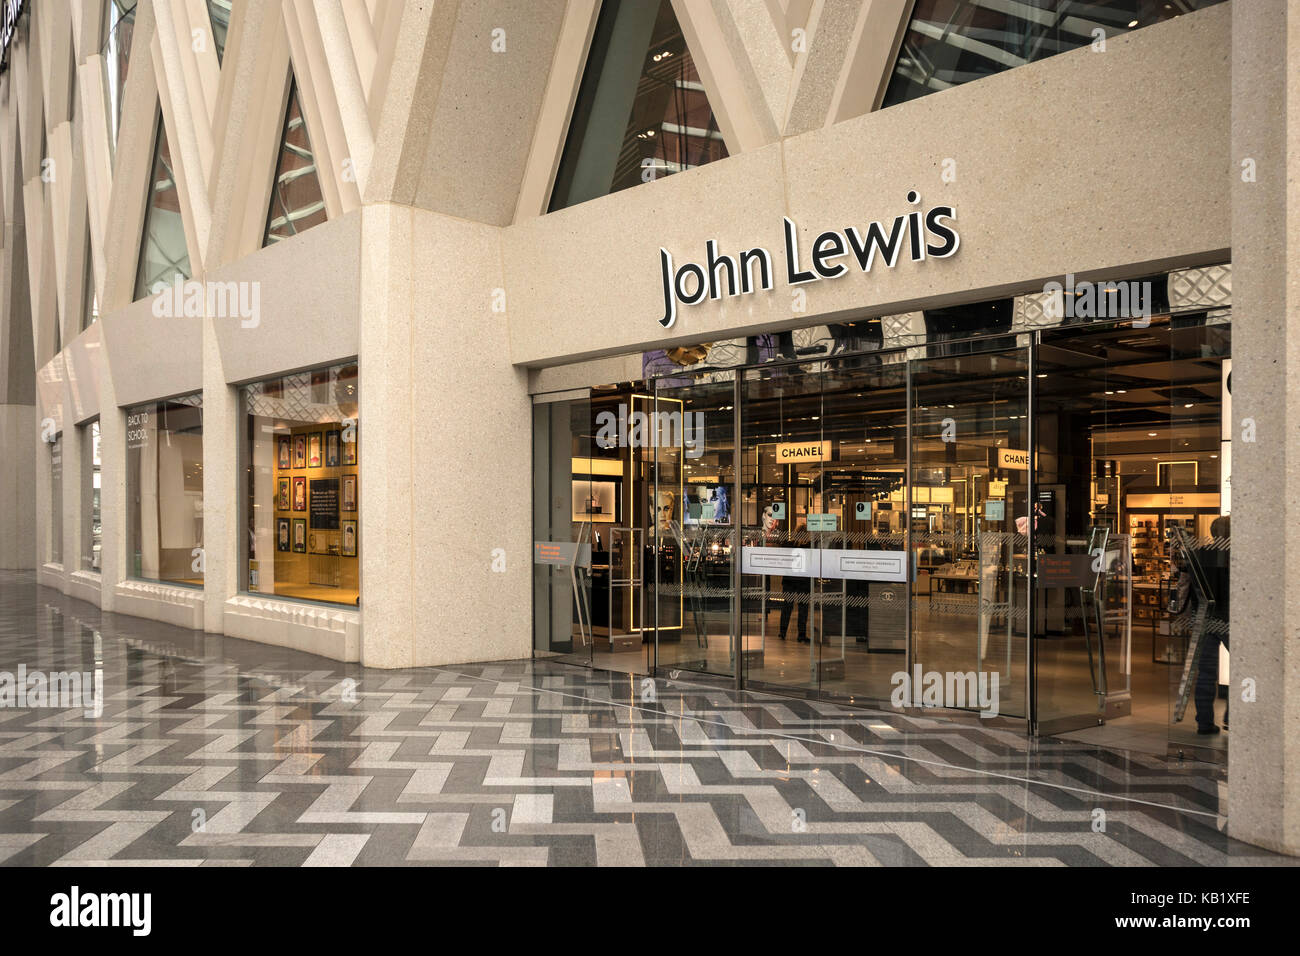 Interior of The Victoria Gate Shopping Mall in Leeds, opened in 2017, with the main tenant being John Lewis. Stock Photo